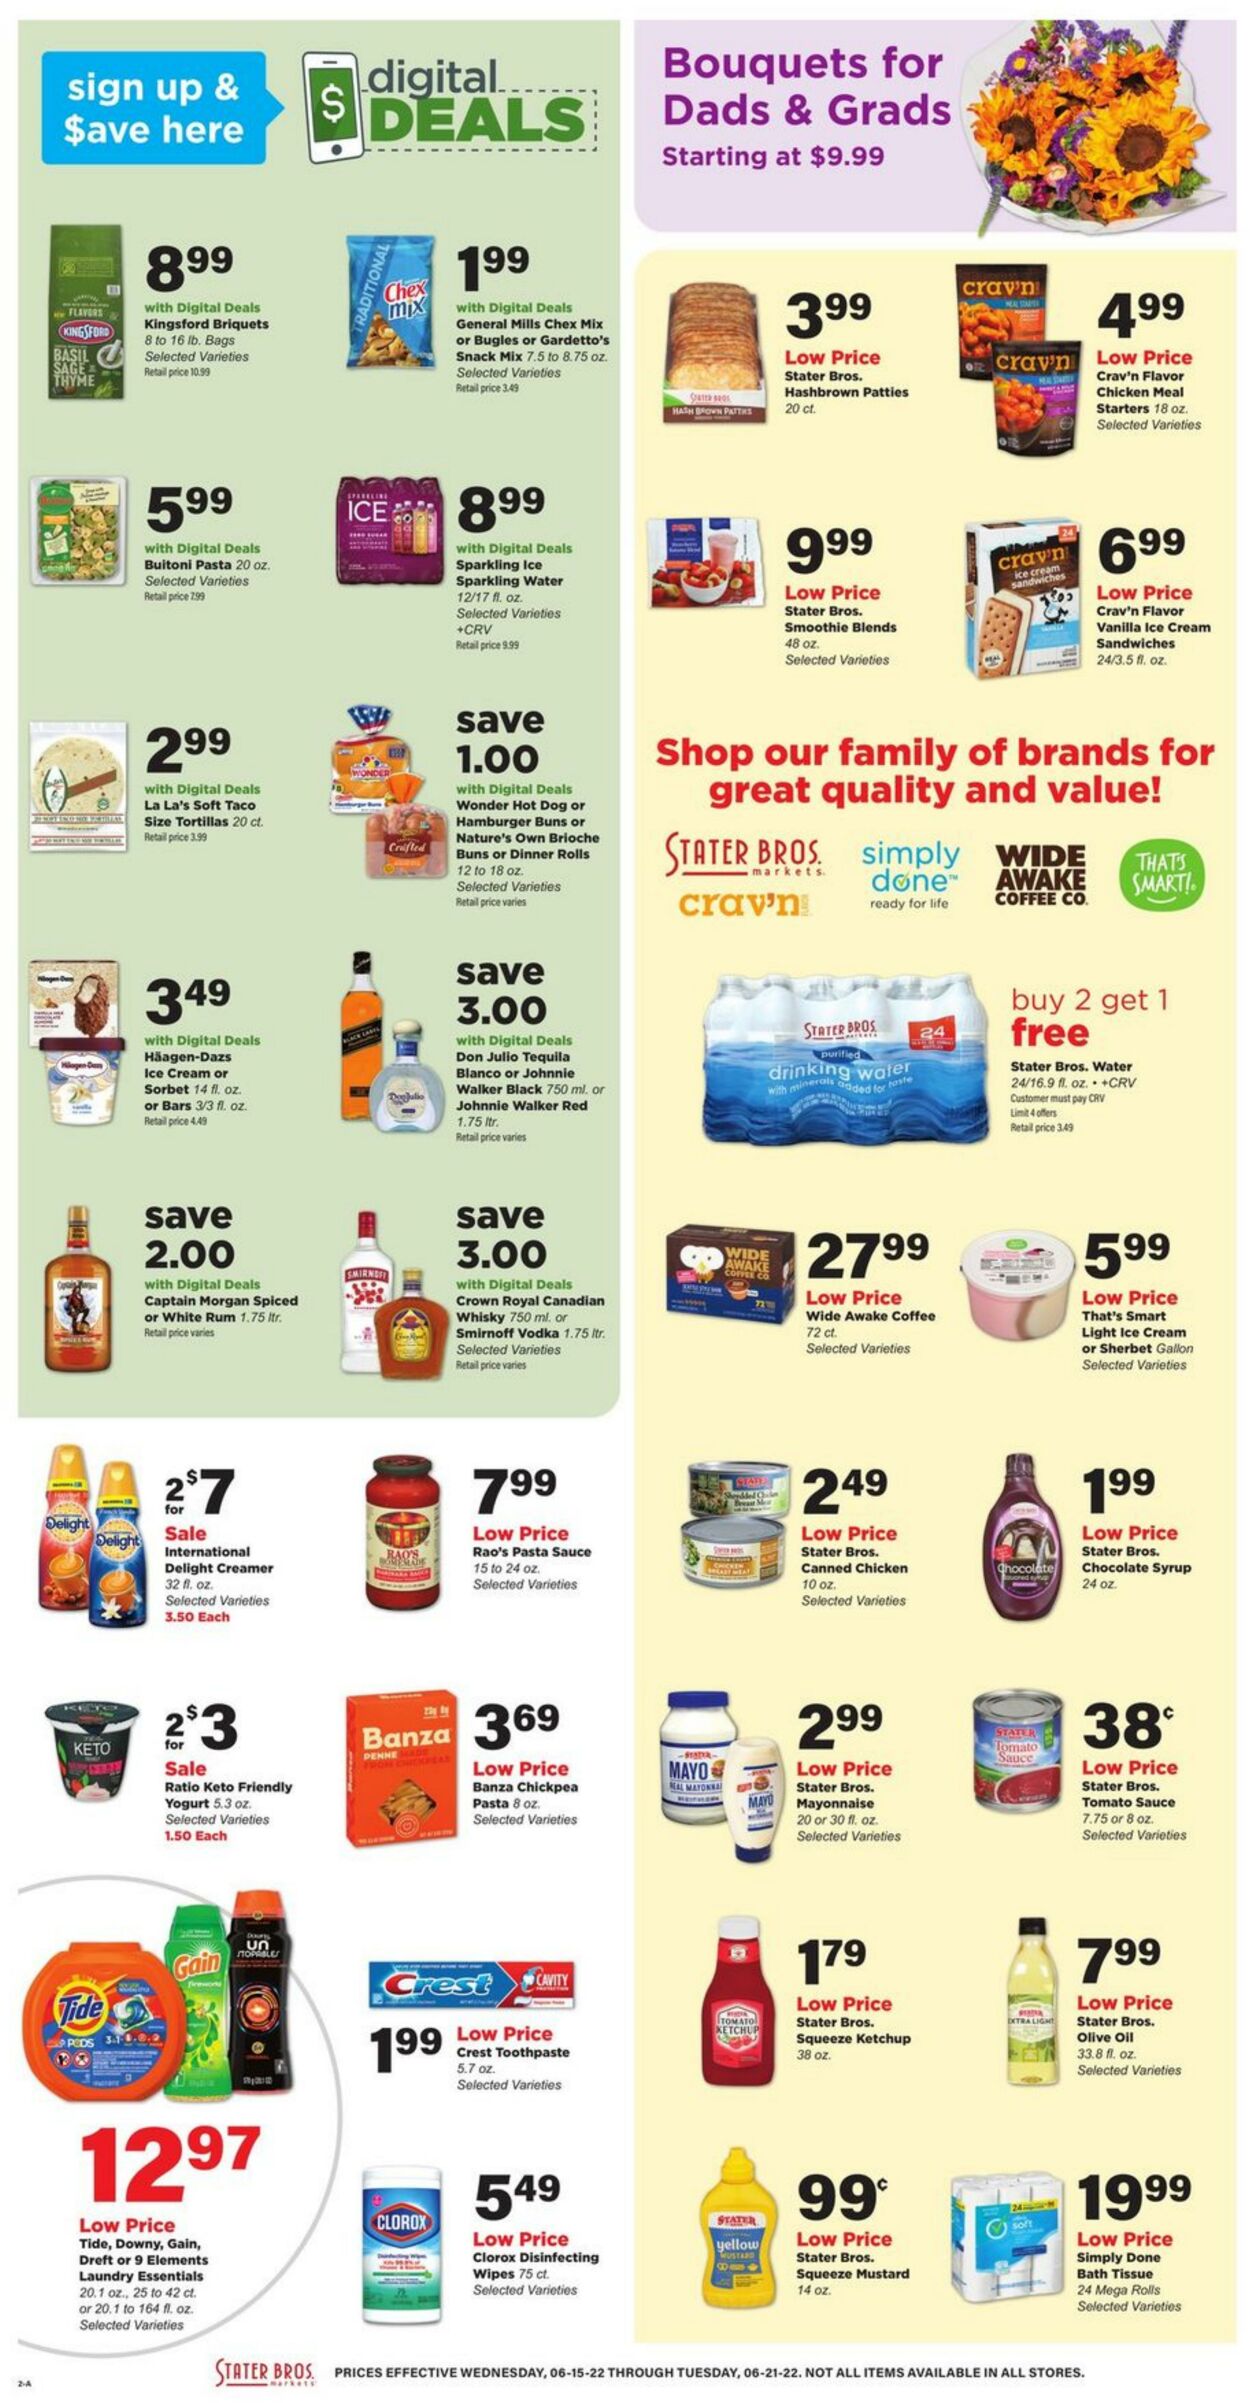 Weekly ad Stater Bros 06/15/2022 - 06/21/2022